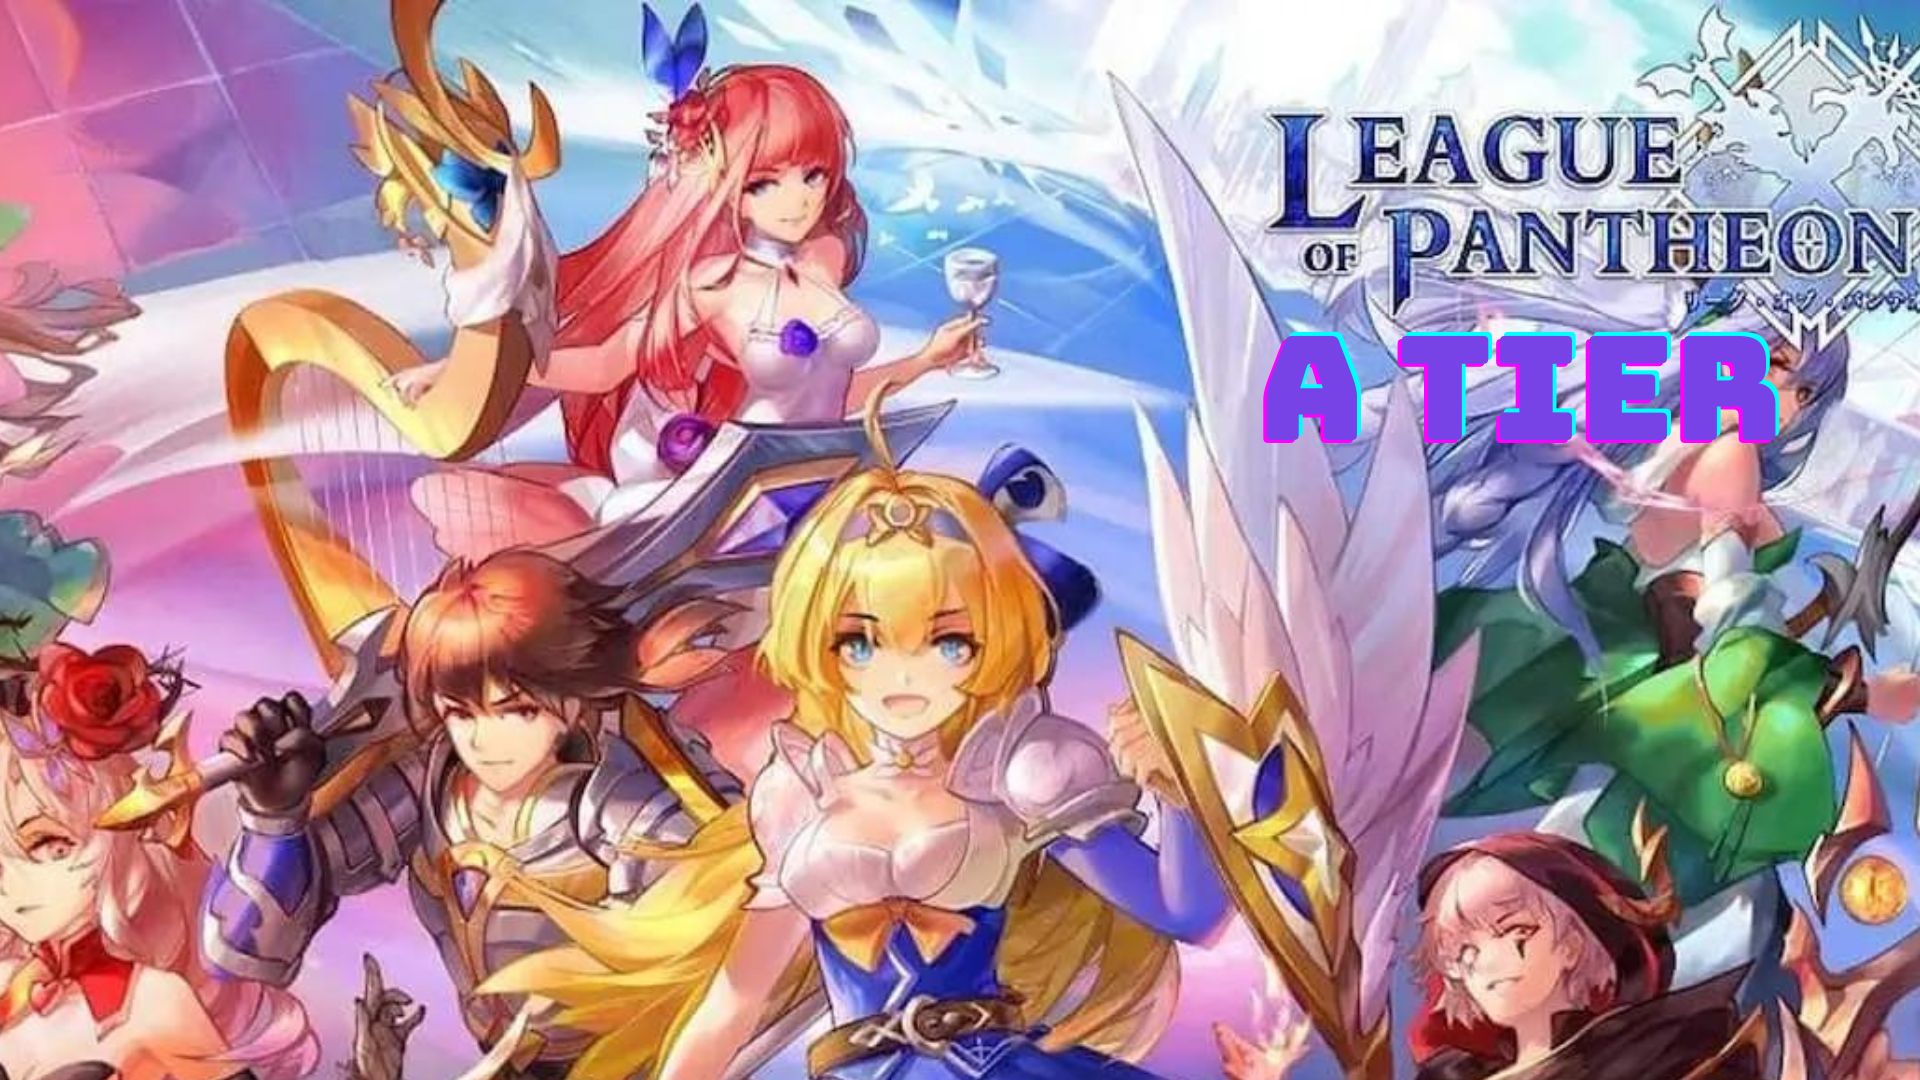 Good heroes of League of Pantheons